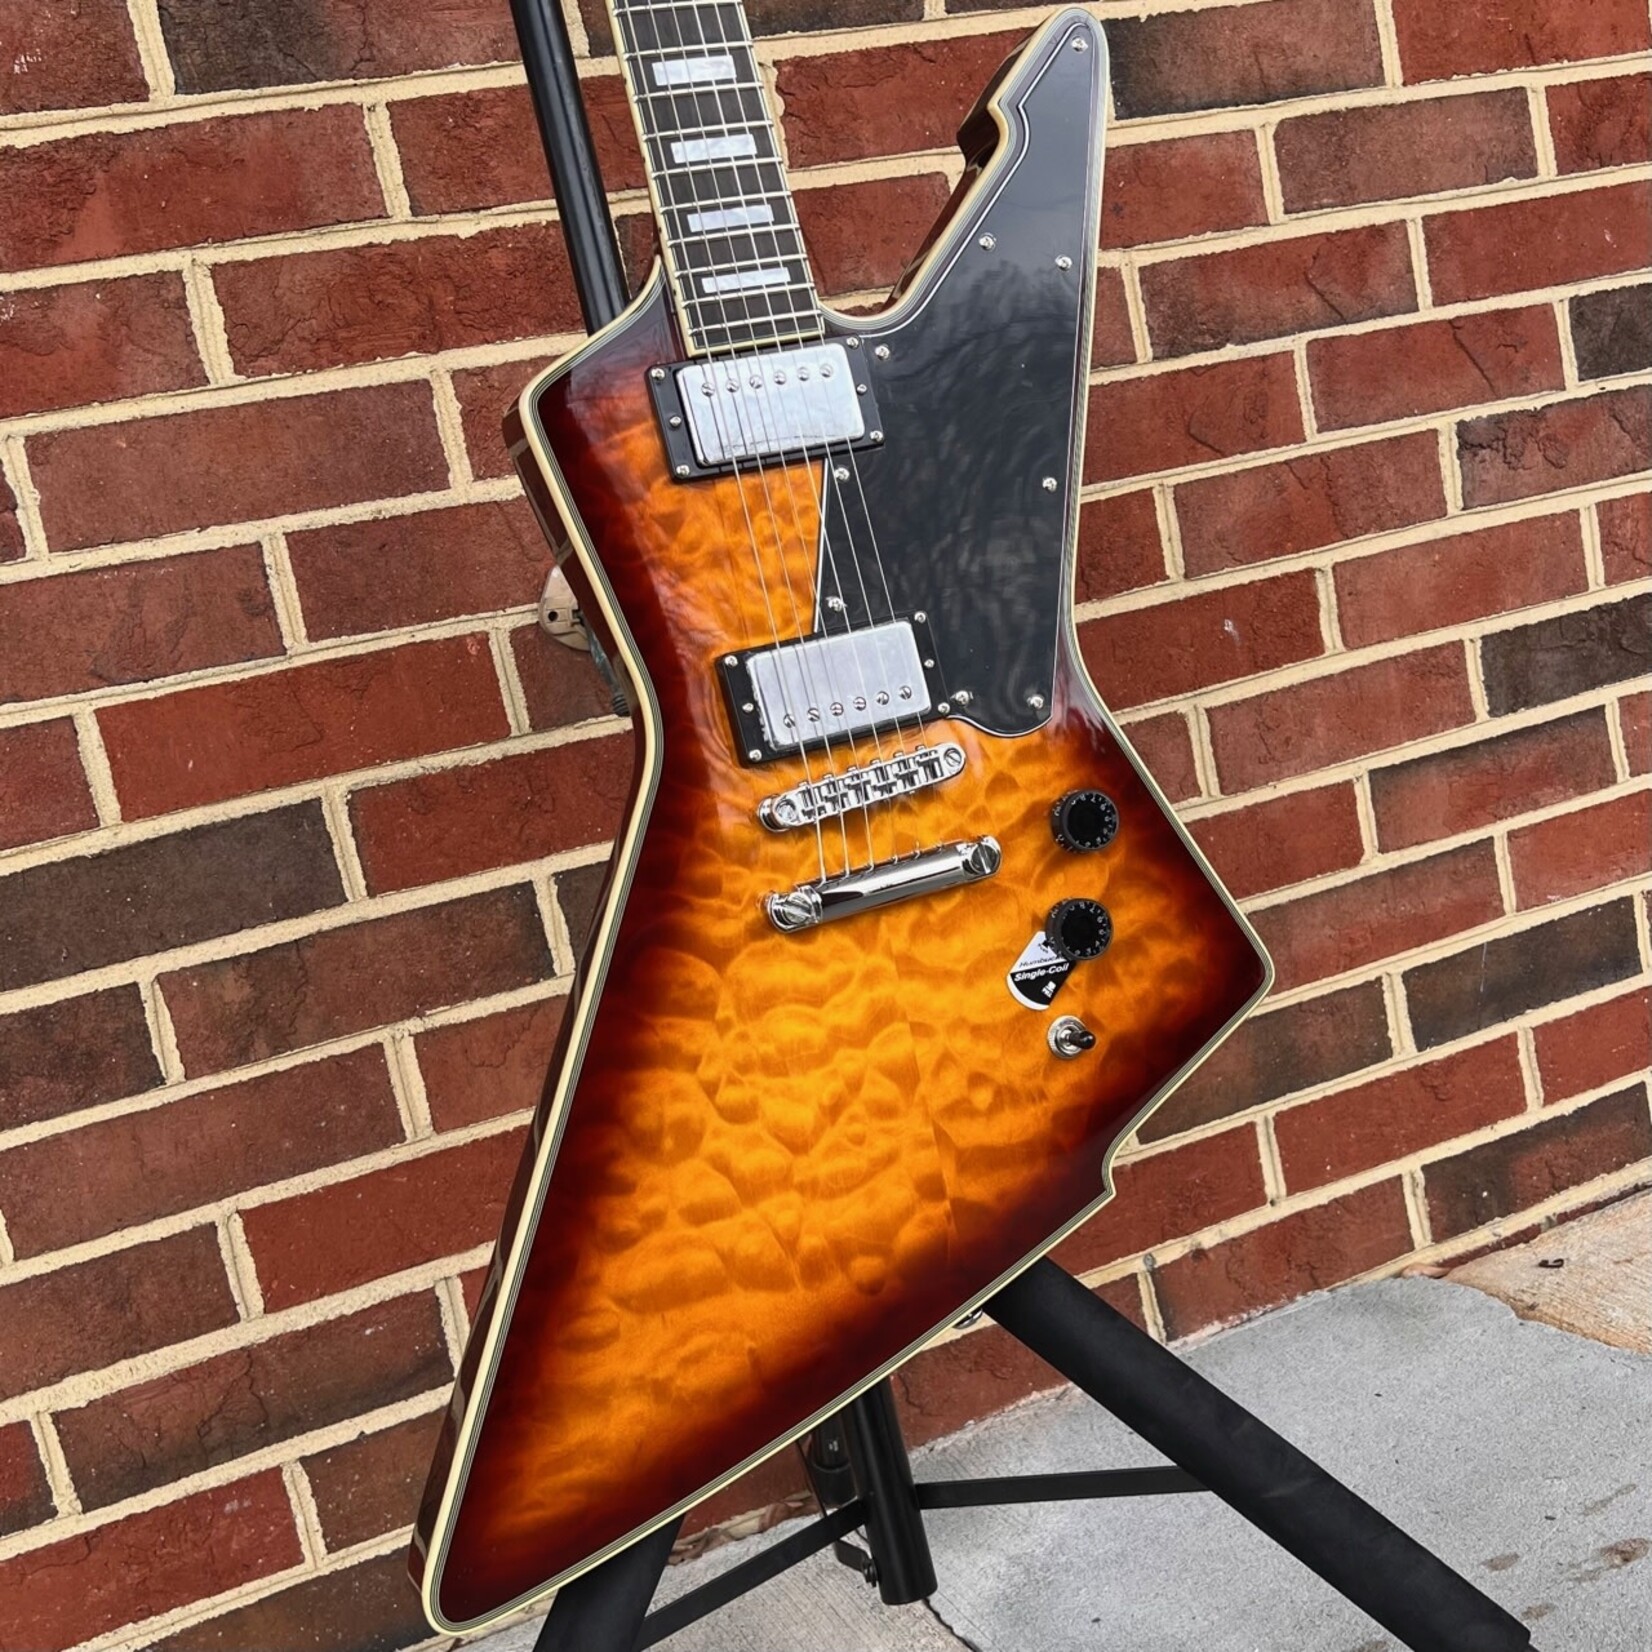 Schecter Guitar Research Schecter E-1 Custom, Vintage Sunburst, Quilted Maple Top, Ebony Fretboard, Locking Tuners, Schecter USA Sunset Strip/Pasadena Pickups, SN# W23111825